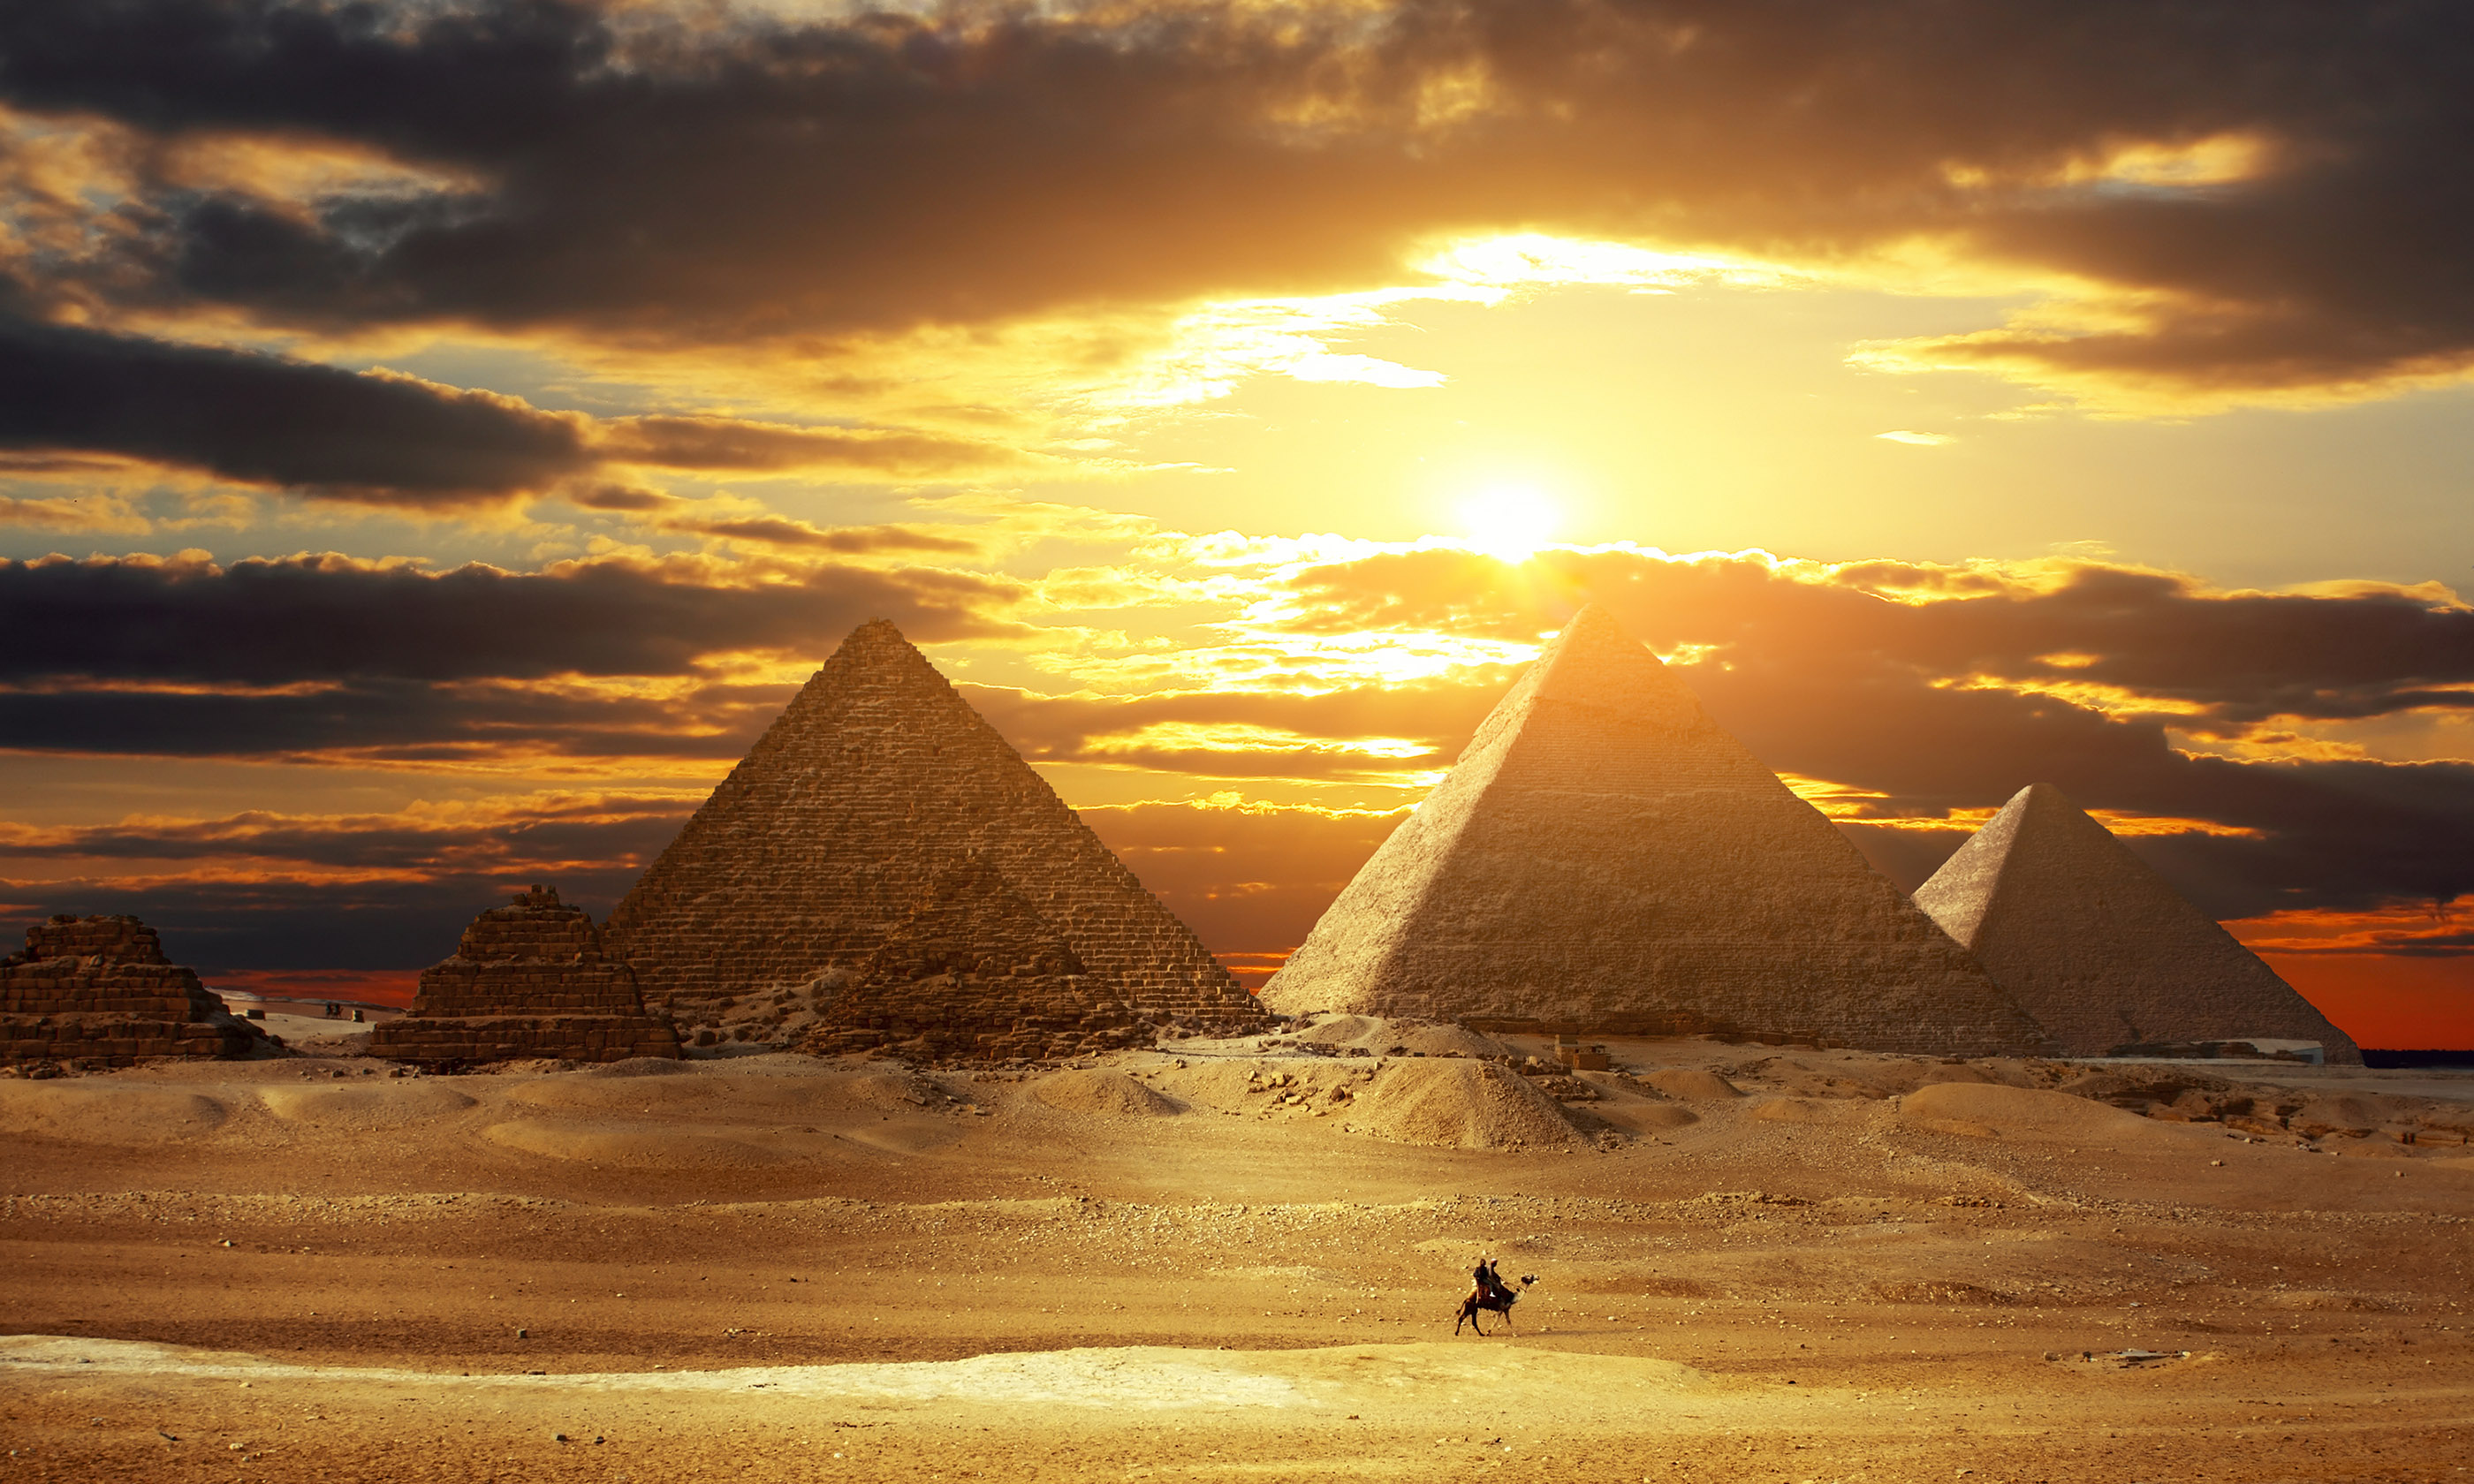 The pyramids at sunset (Shutterstock: see credit below)